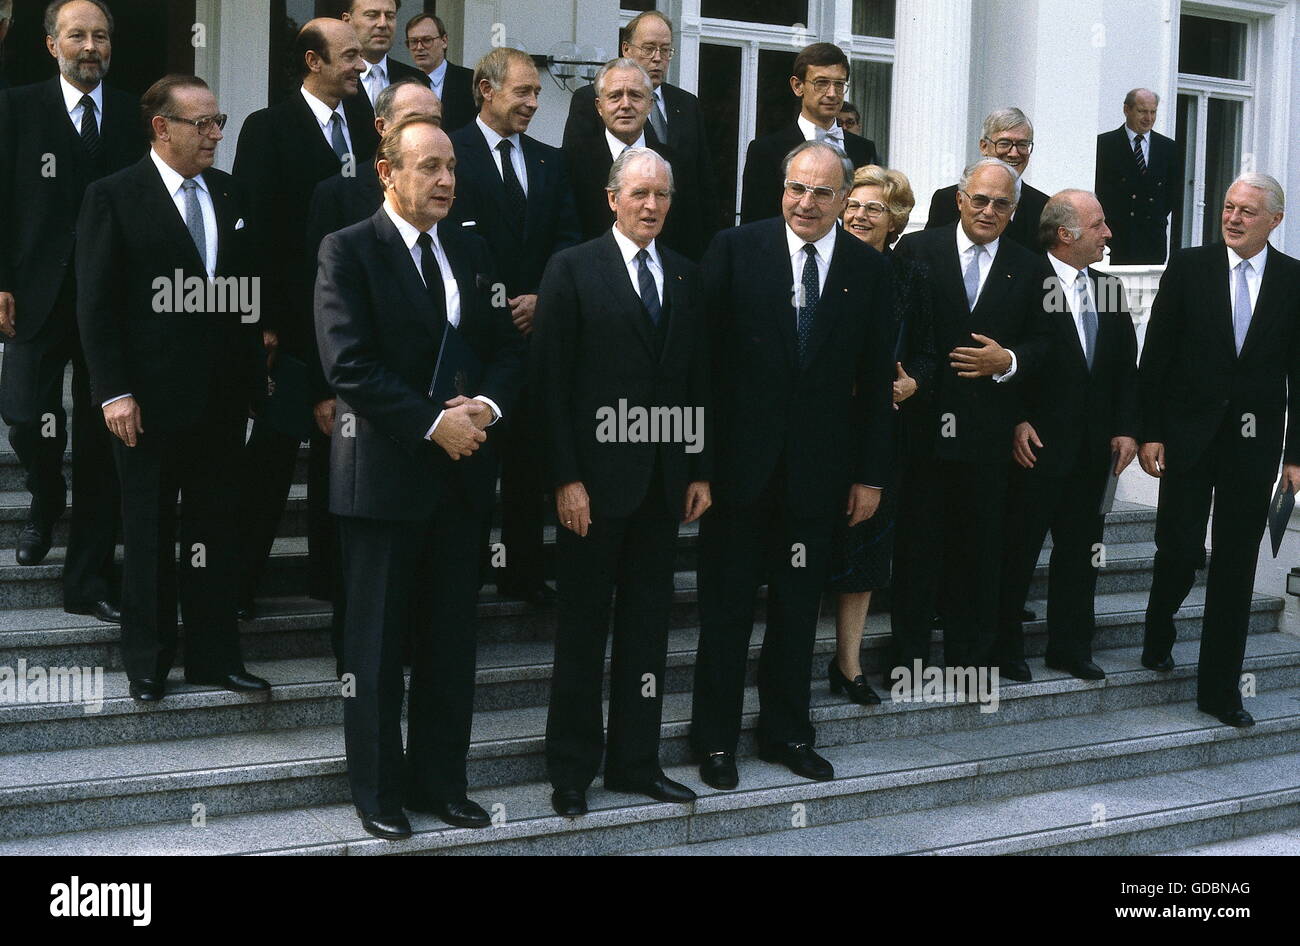 Kohl, Helmut, * 3.4.1930, German politician (CDU), chancellor of Germany 1982 - 1998, group picture with his cabinet after appointment, Villa Hammerschmidt, Bonn, 4.10.1982, Stock Photo